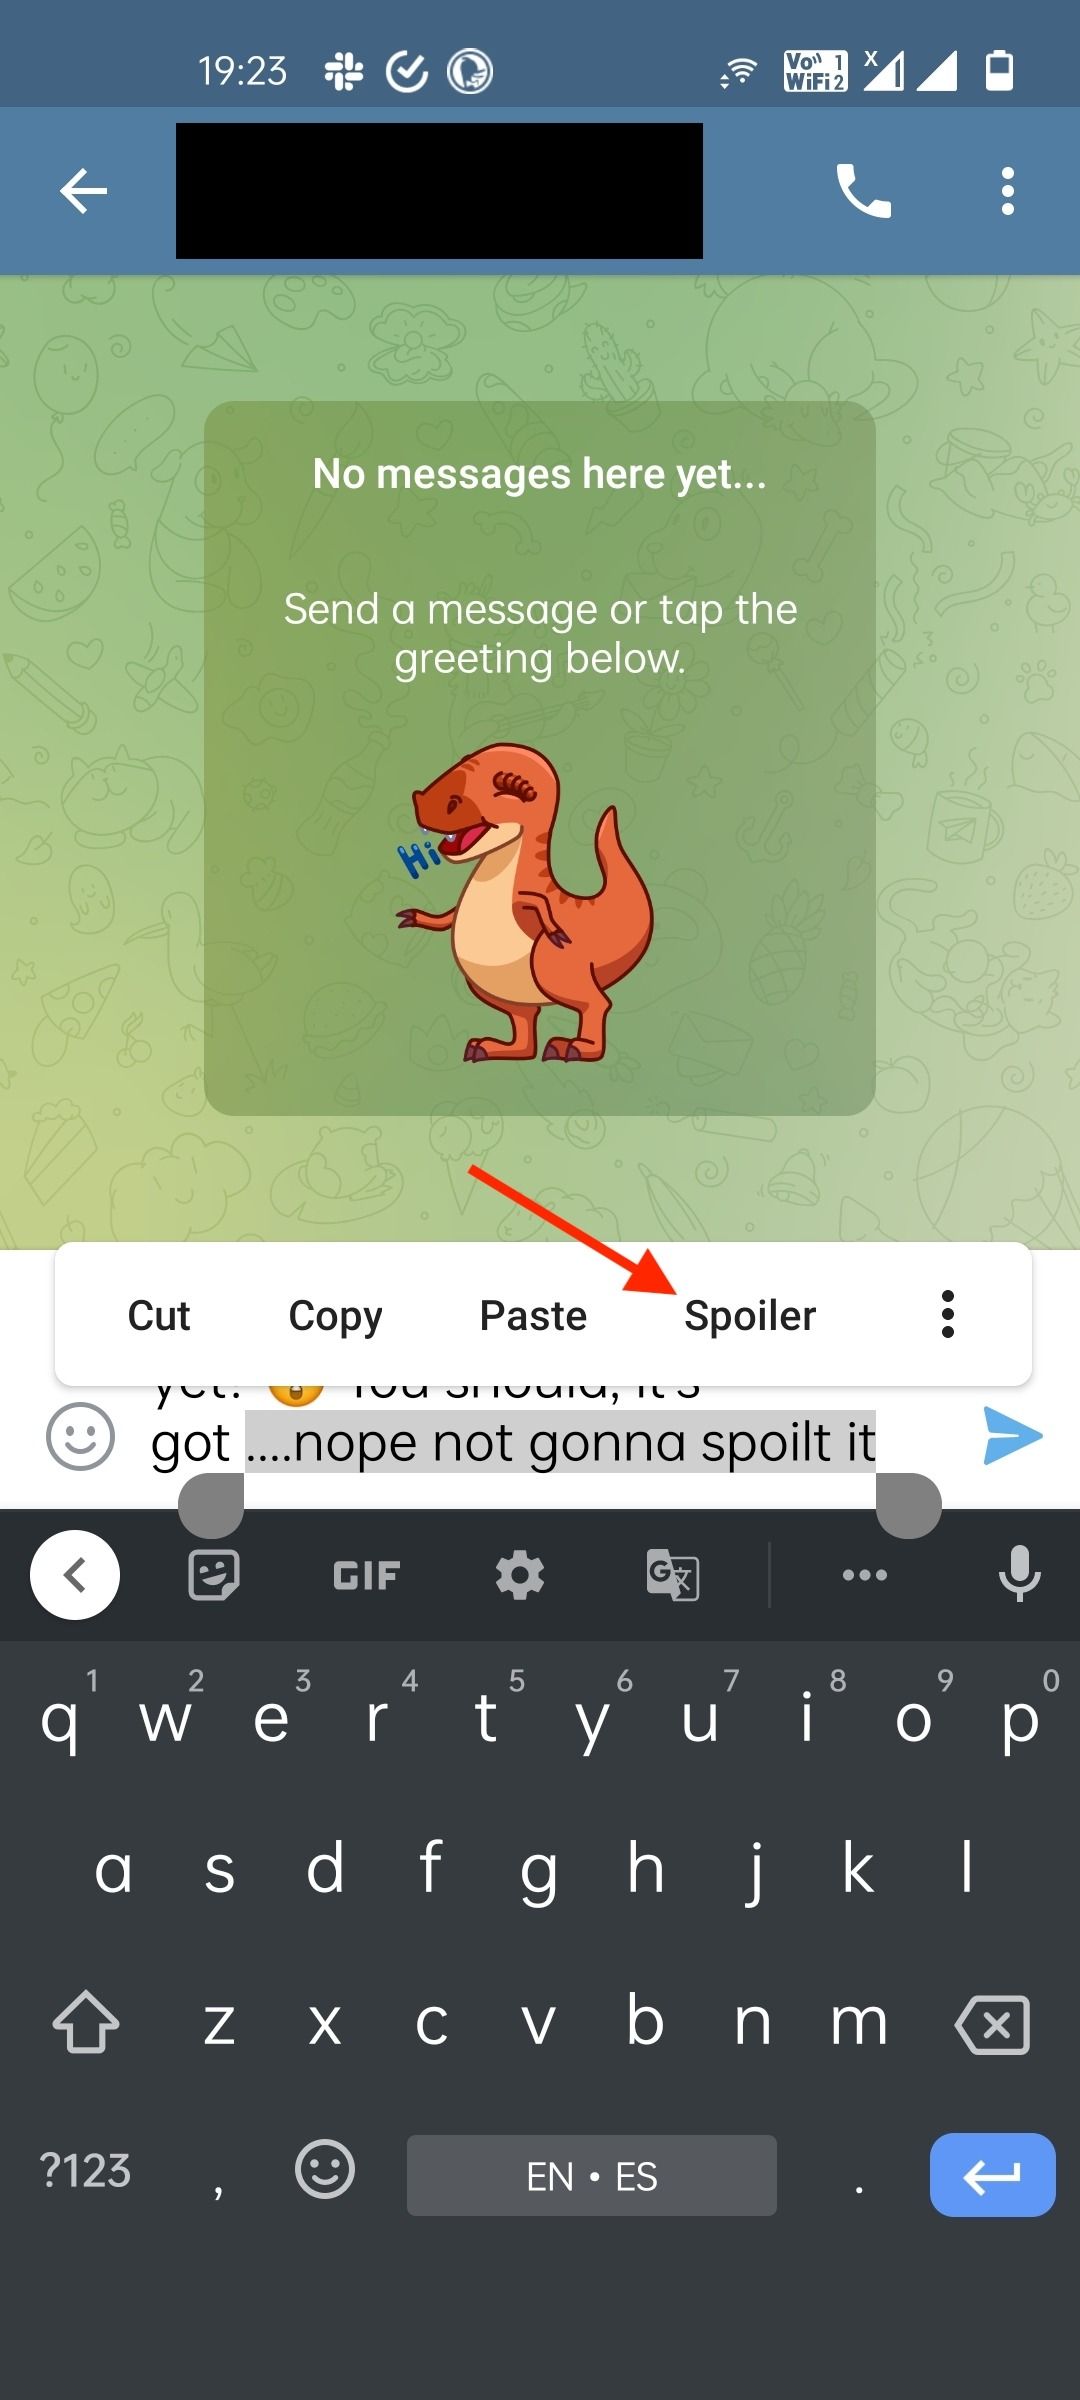 Telegram chat window with some text selected and the Spoiler setting highlighted